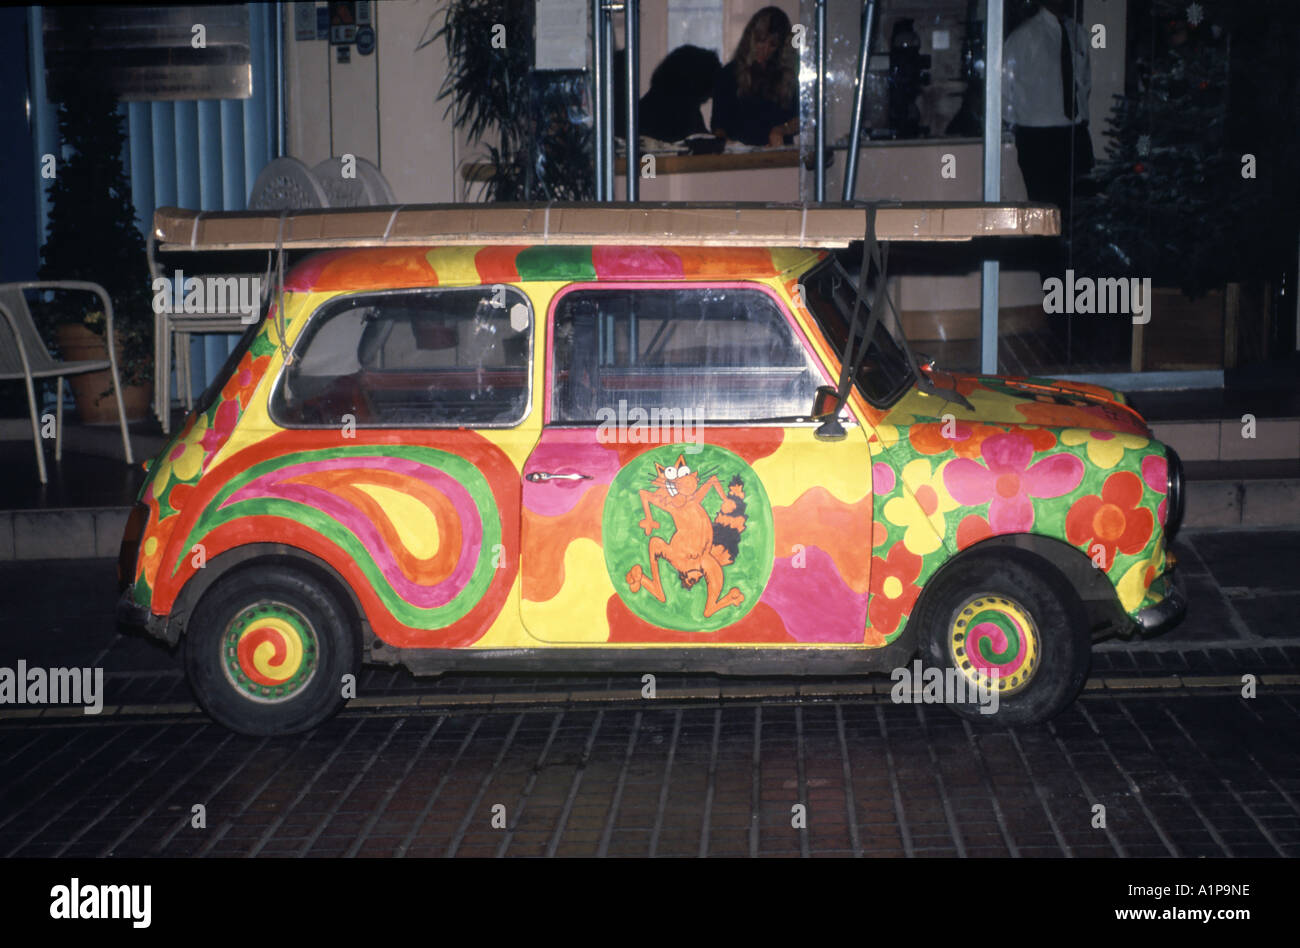 West End of London parked brightly decorated funky artwork paint job on iconic Mini motor car England UK Stock Photo